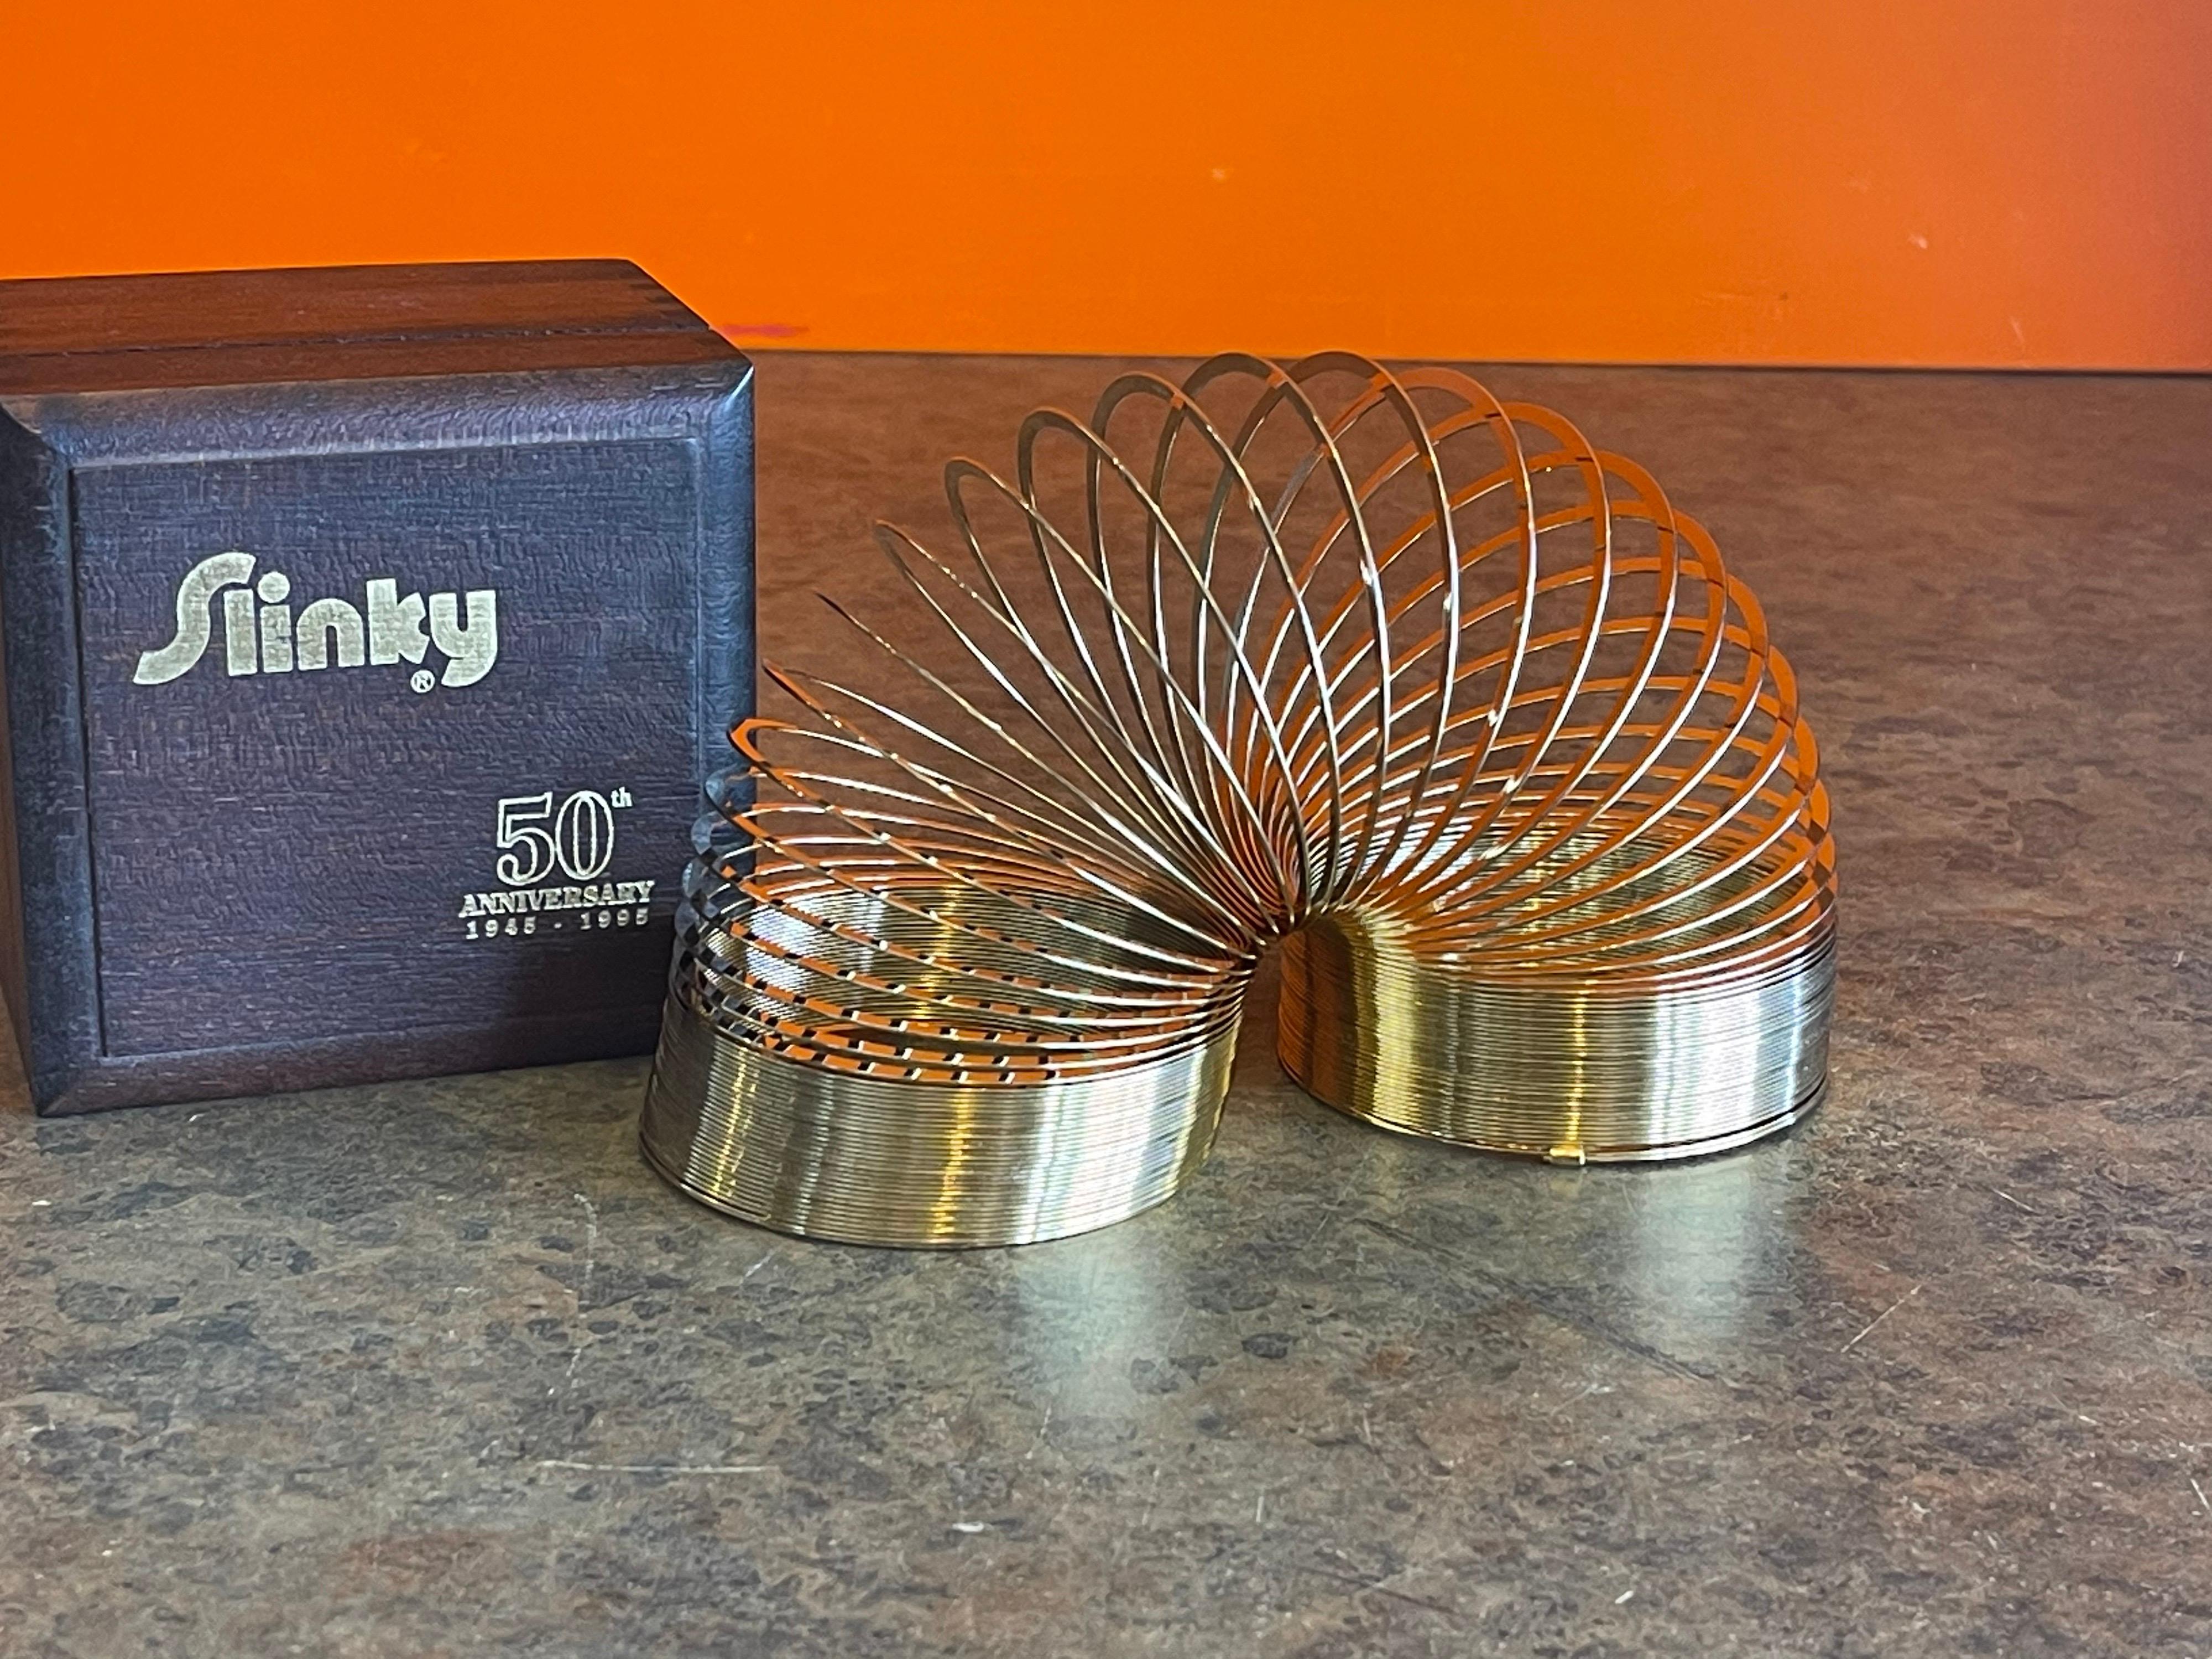 50th Anniversary Gold-Plated Slinky Toy in Wood Box, New Condition 2